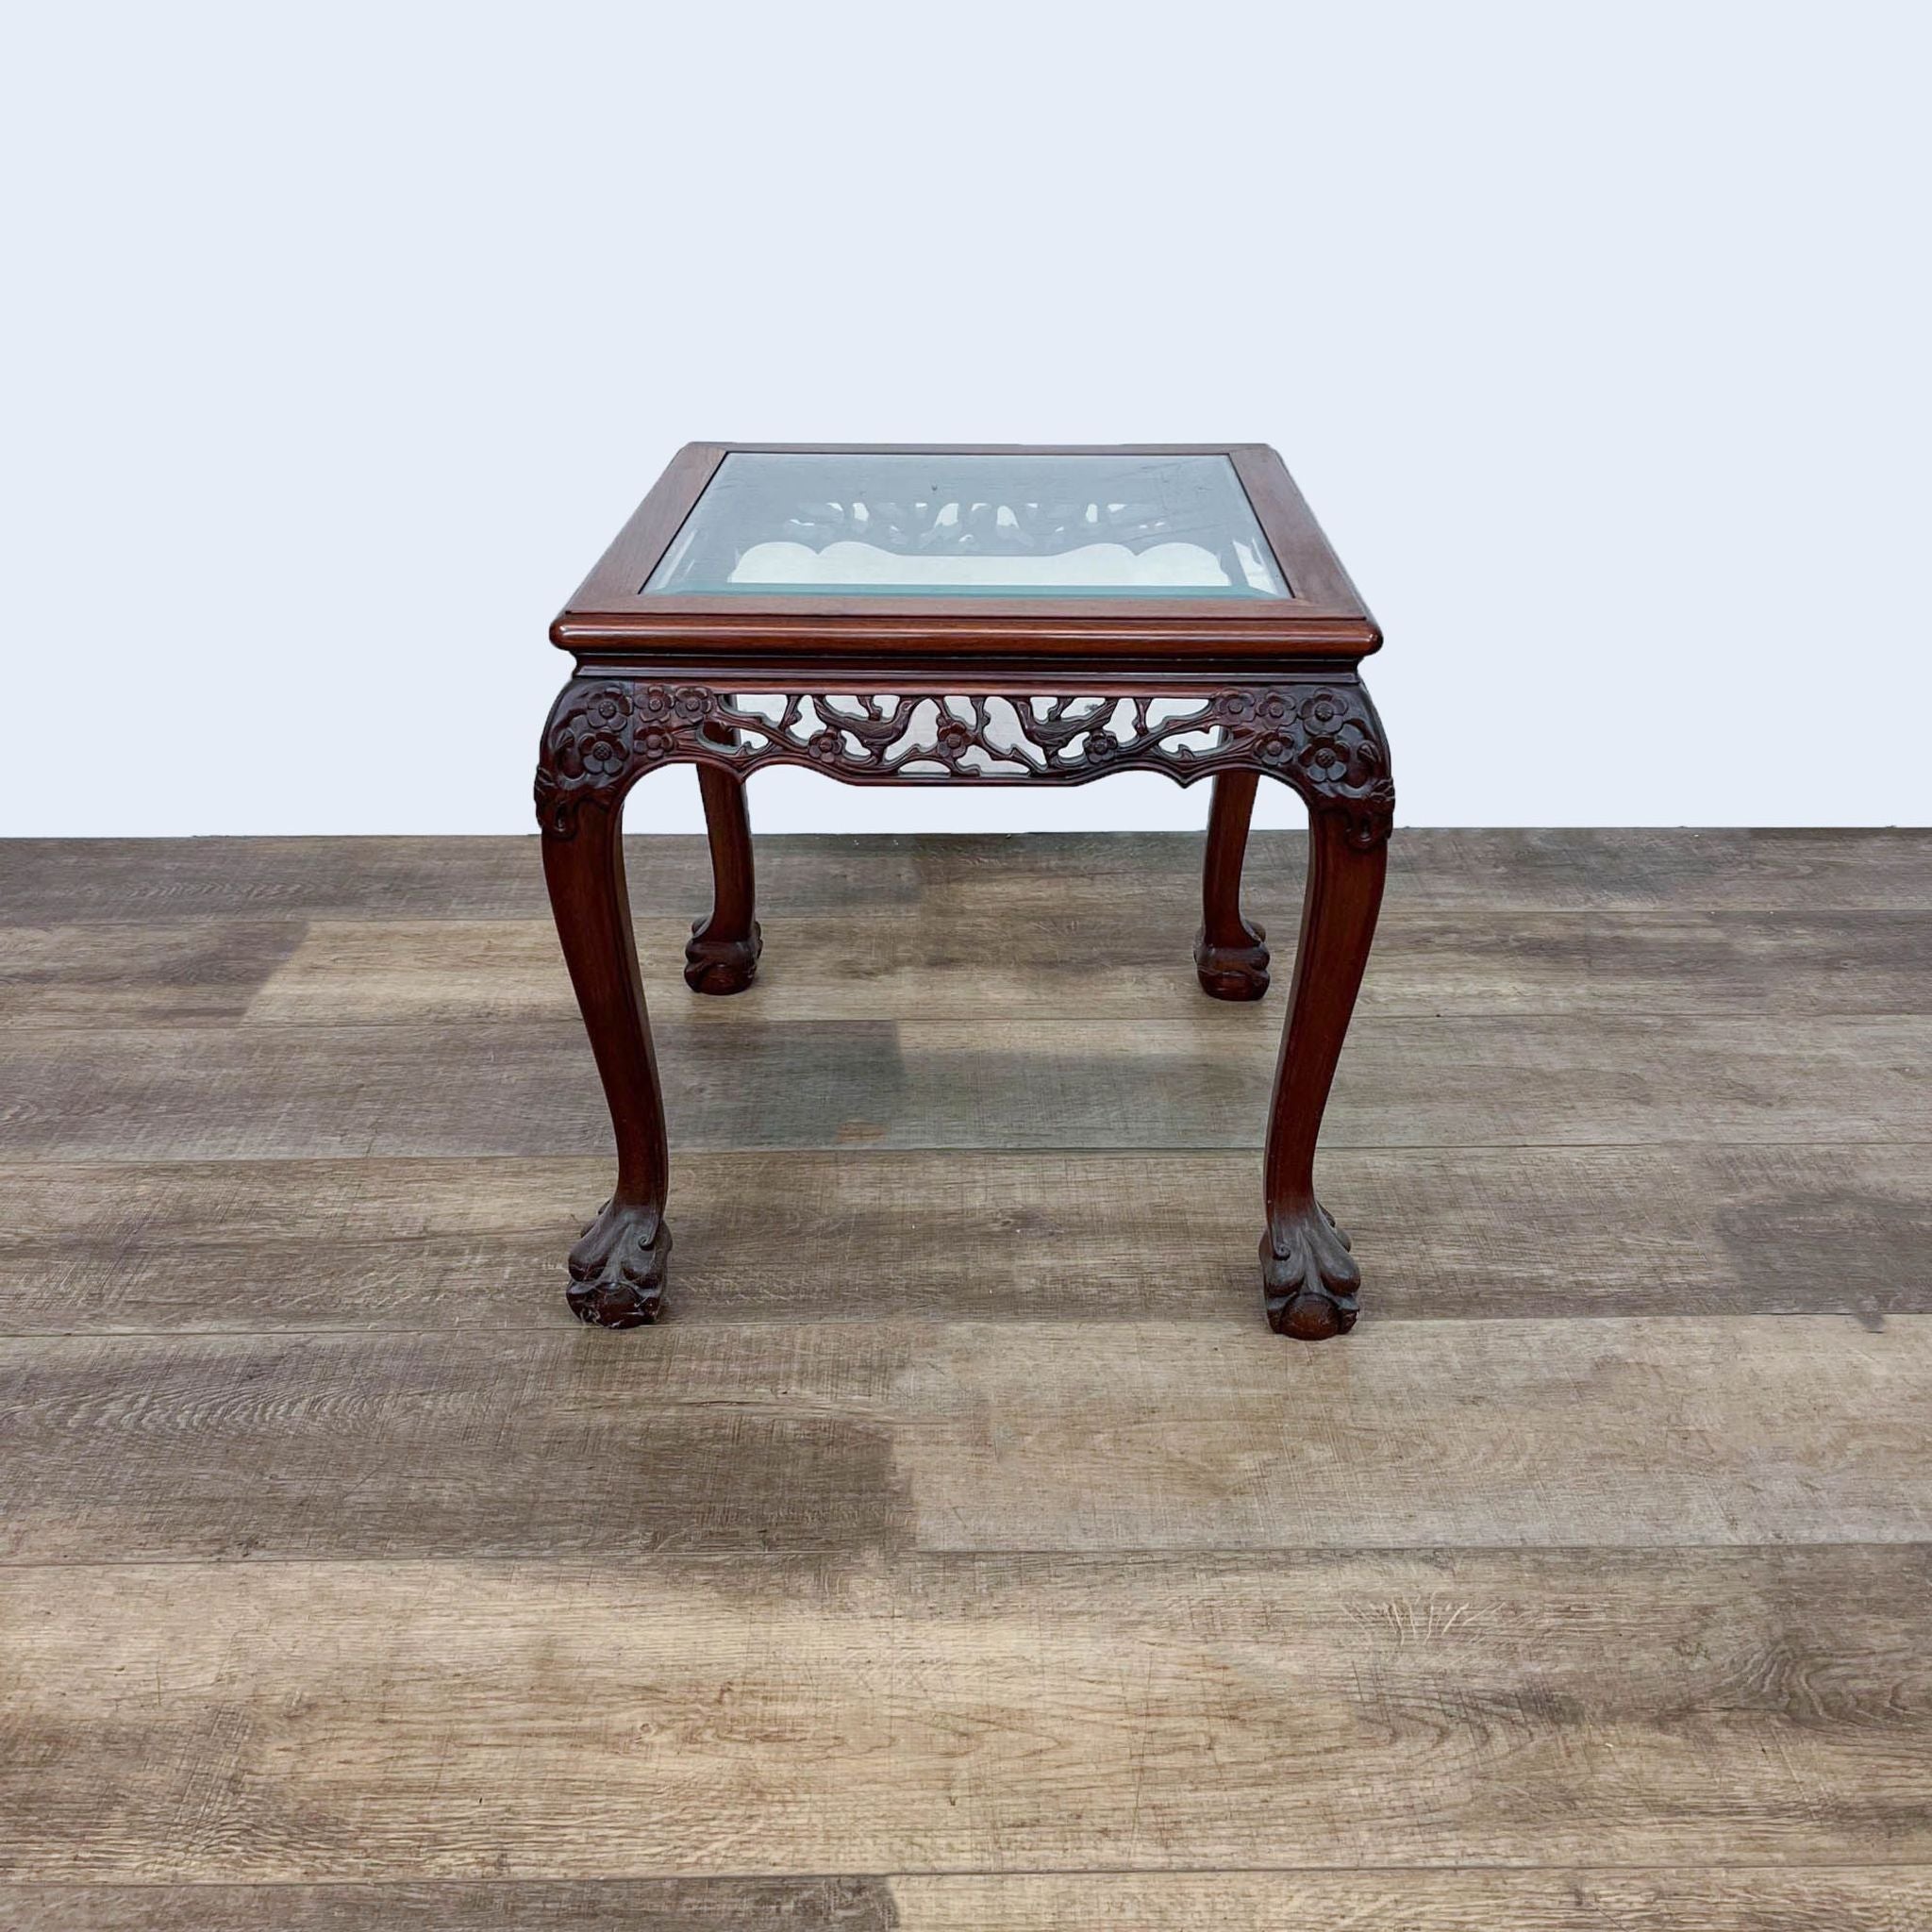 Elegant Reperch end table in the Chinese Chippendale style, showcasing detailed legs with ball and claw design and a glass inset top.